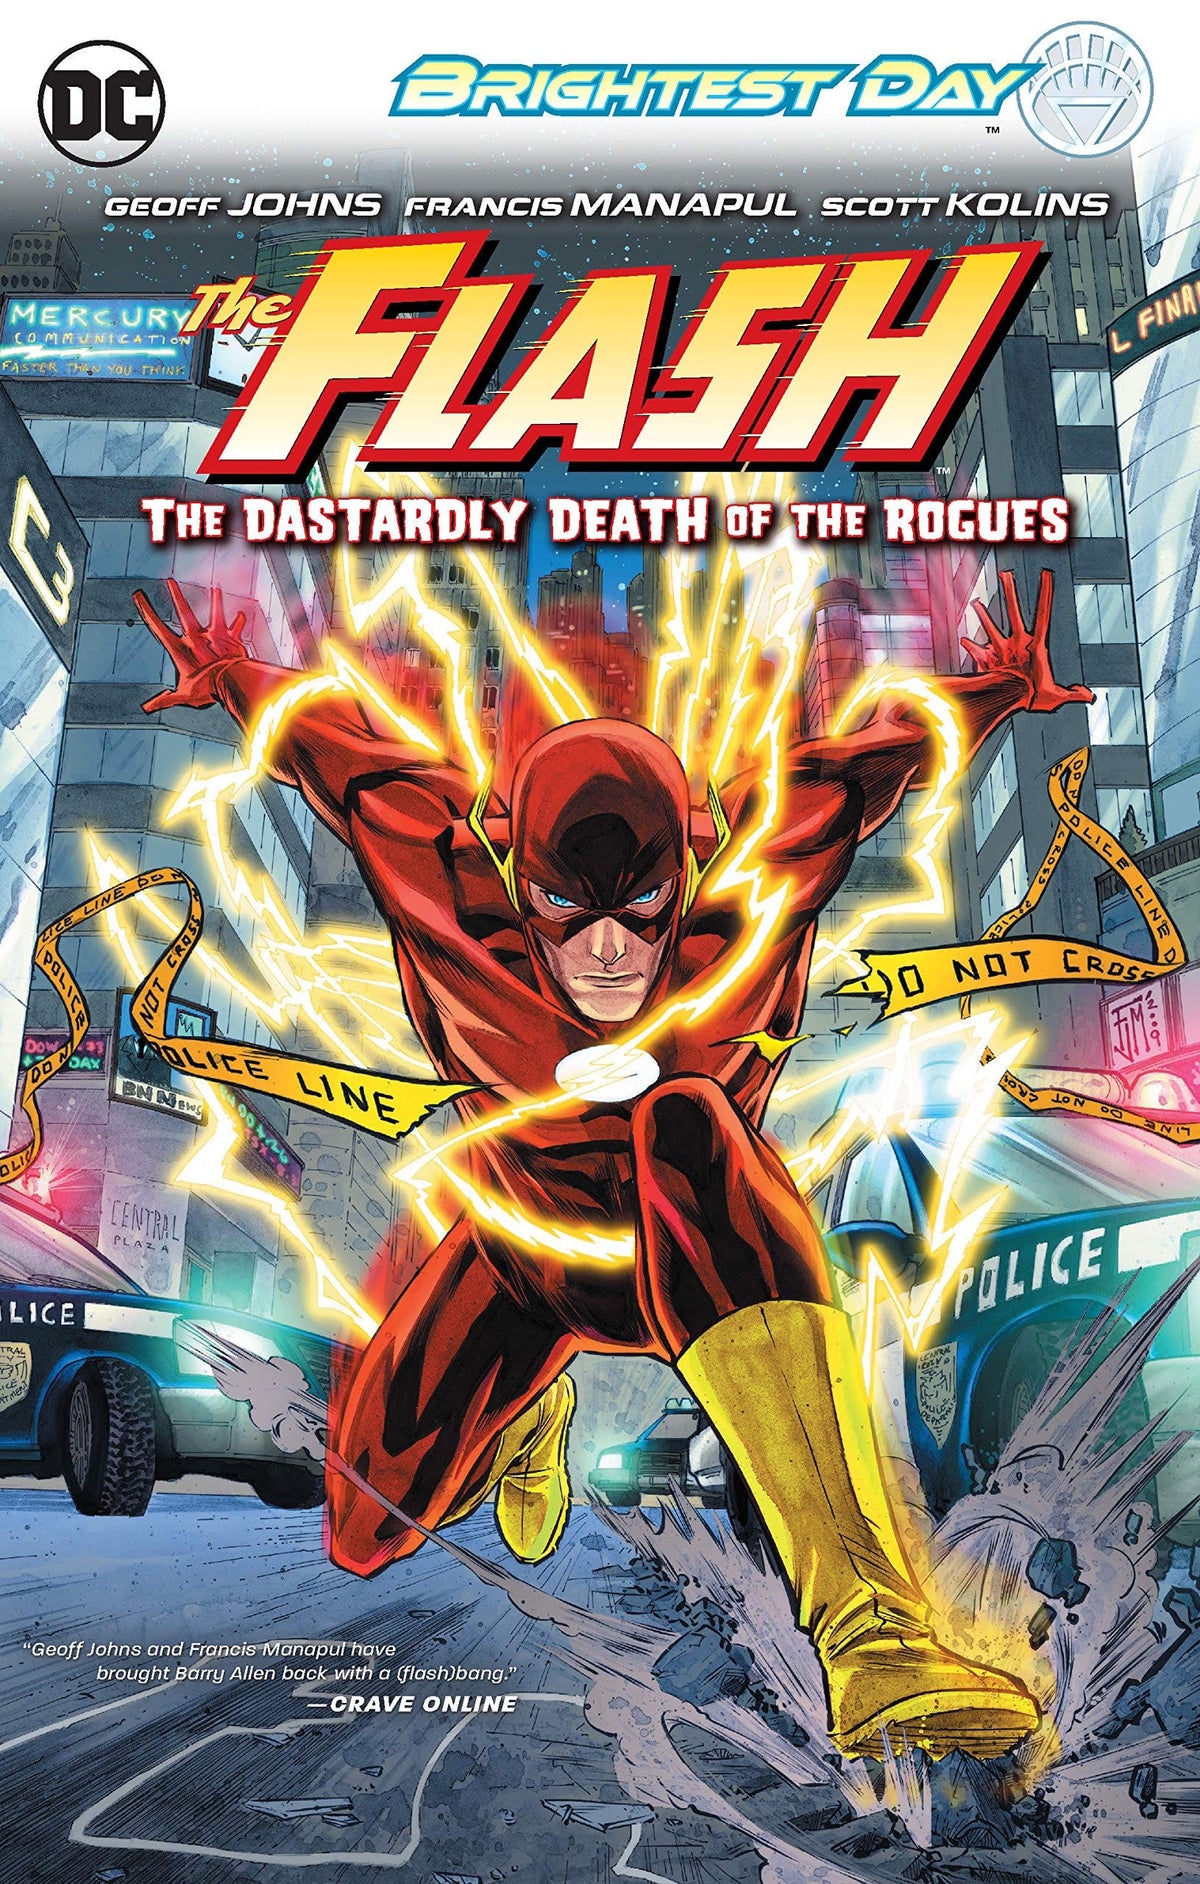 Flash Vol. 1: Dastardly Death of the Rogues TP (Brightest Day) - Third Eye